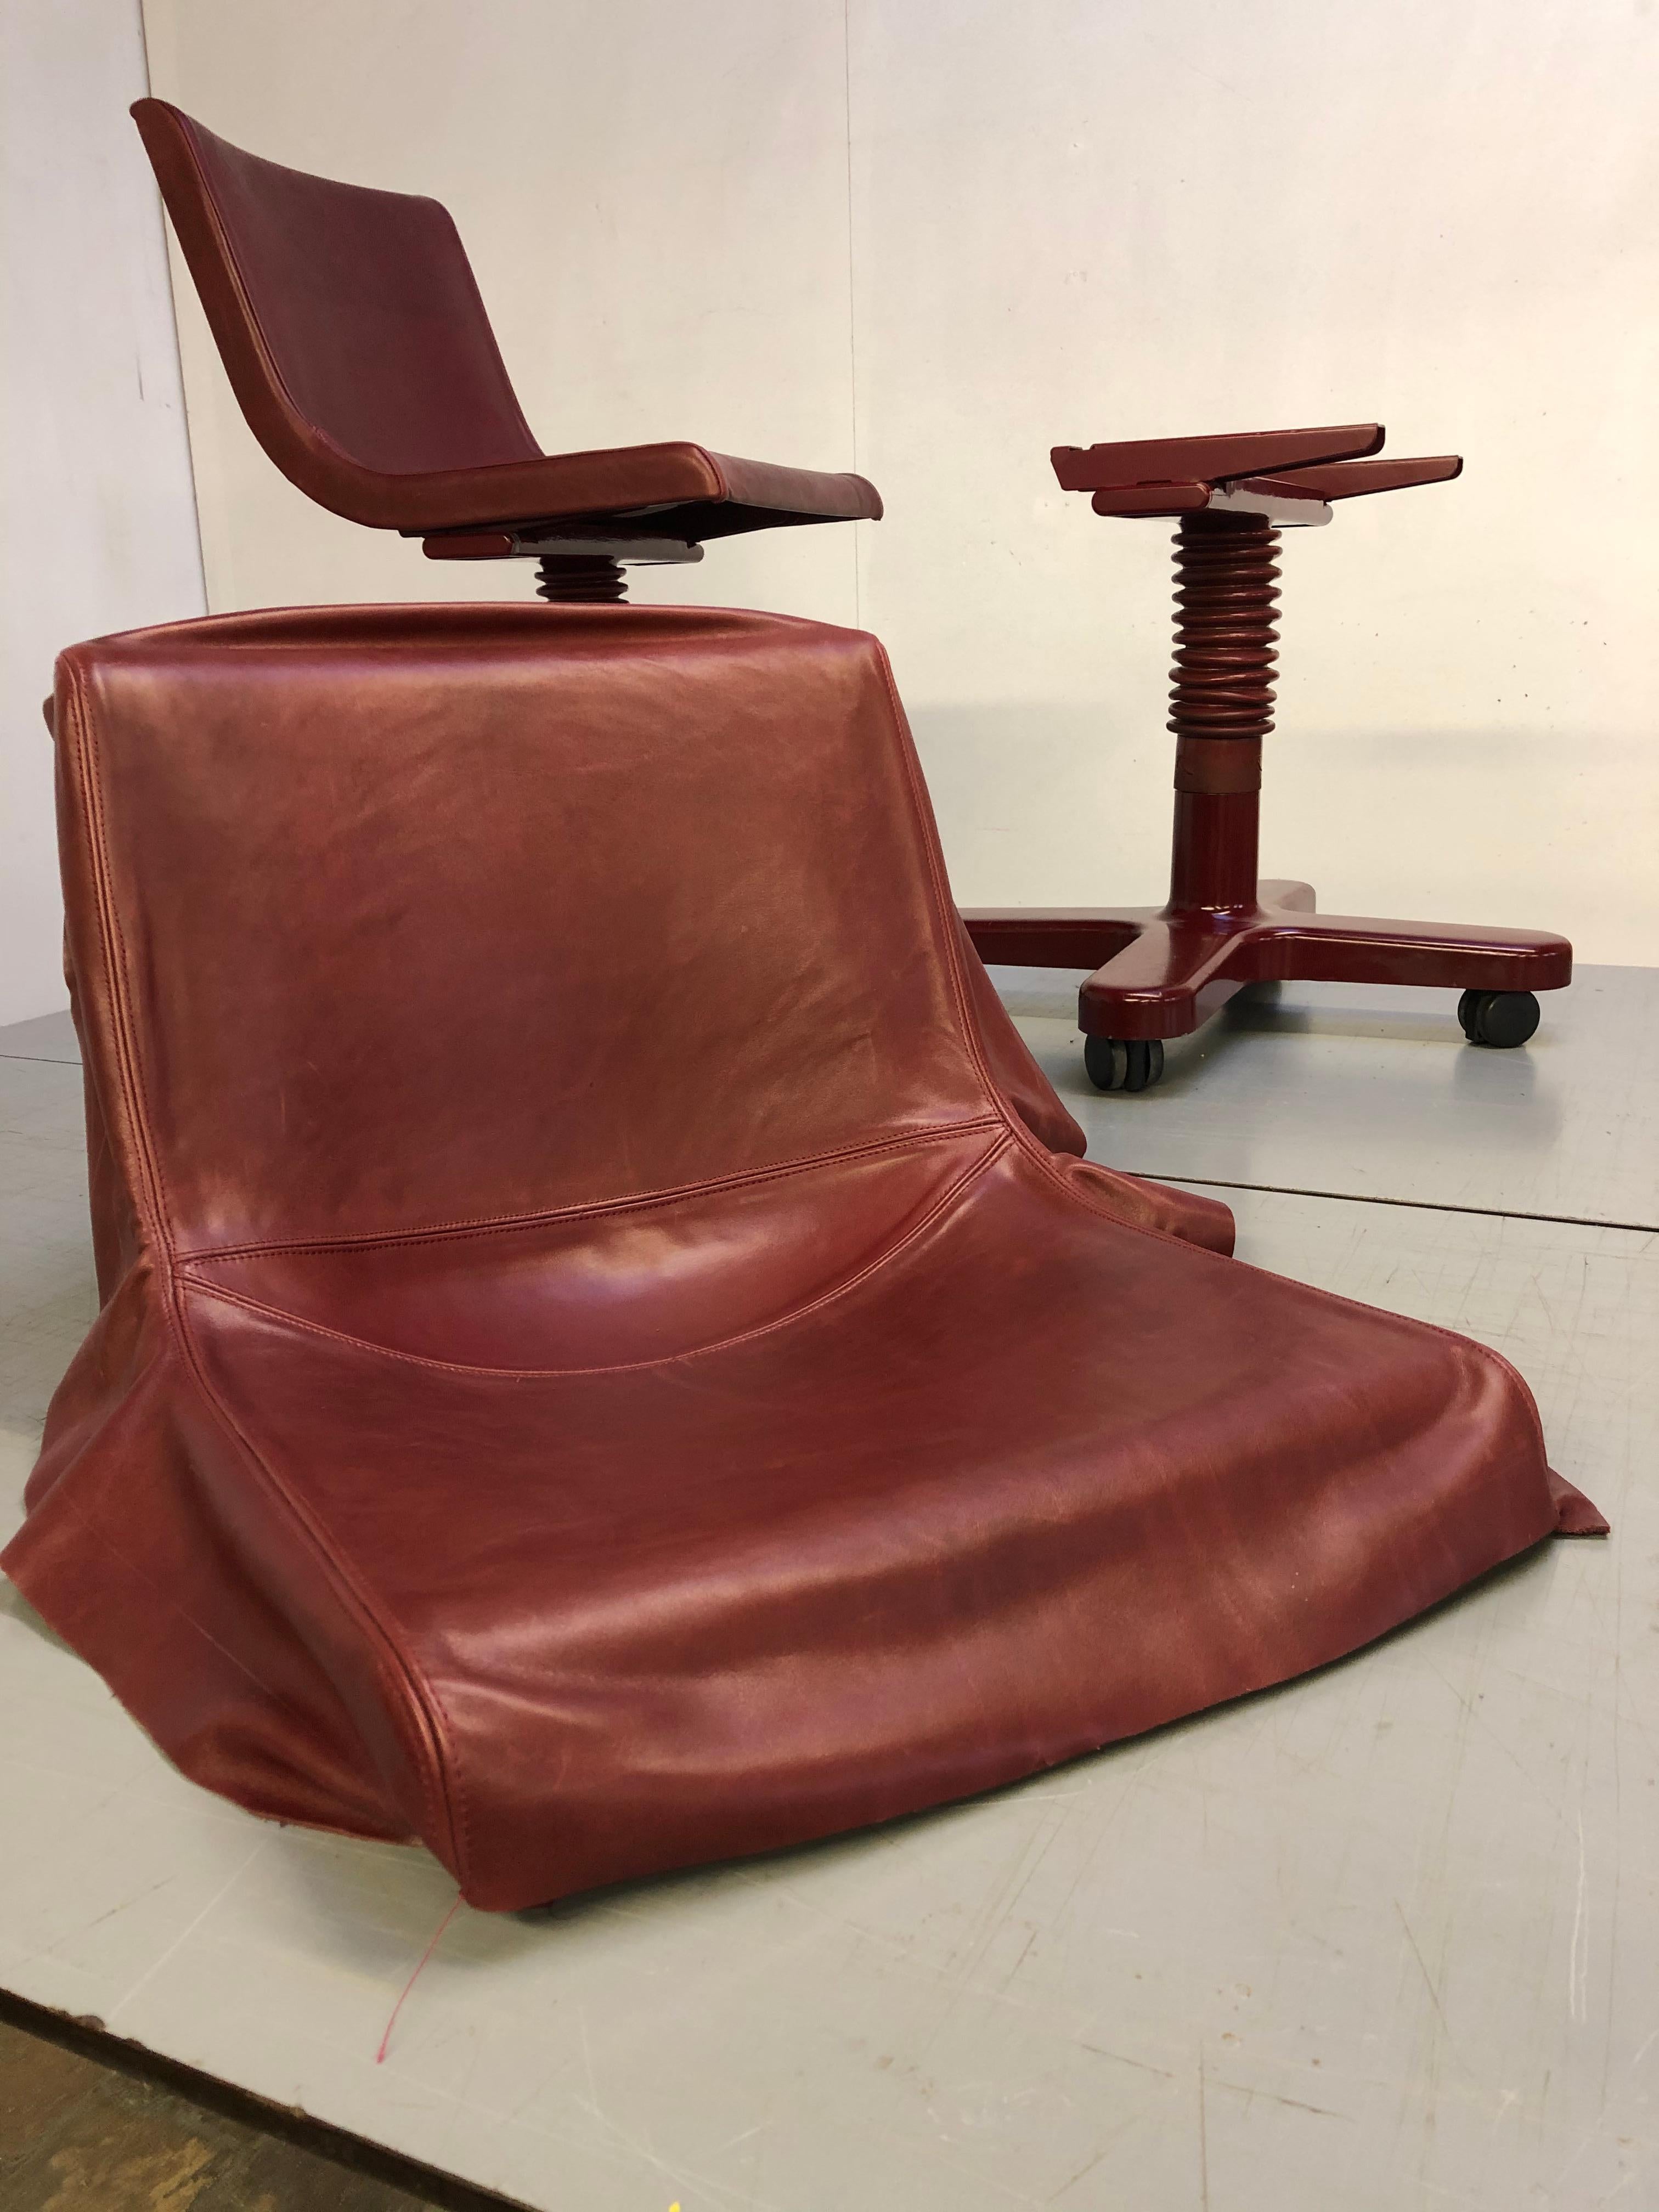 Molded Bespoke Leather Customized Ettore Sottsass Olivetti Synthesis Desk Chair, Italy